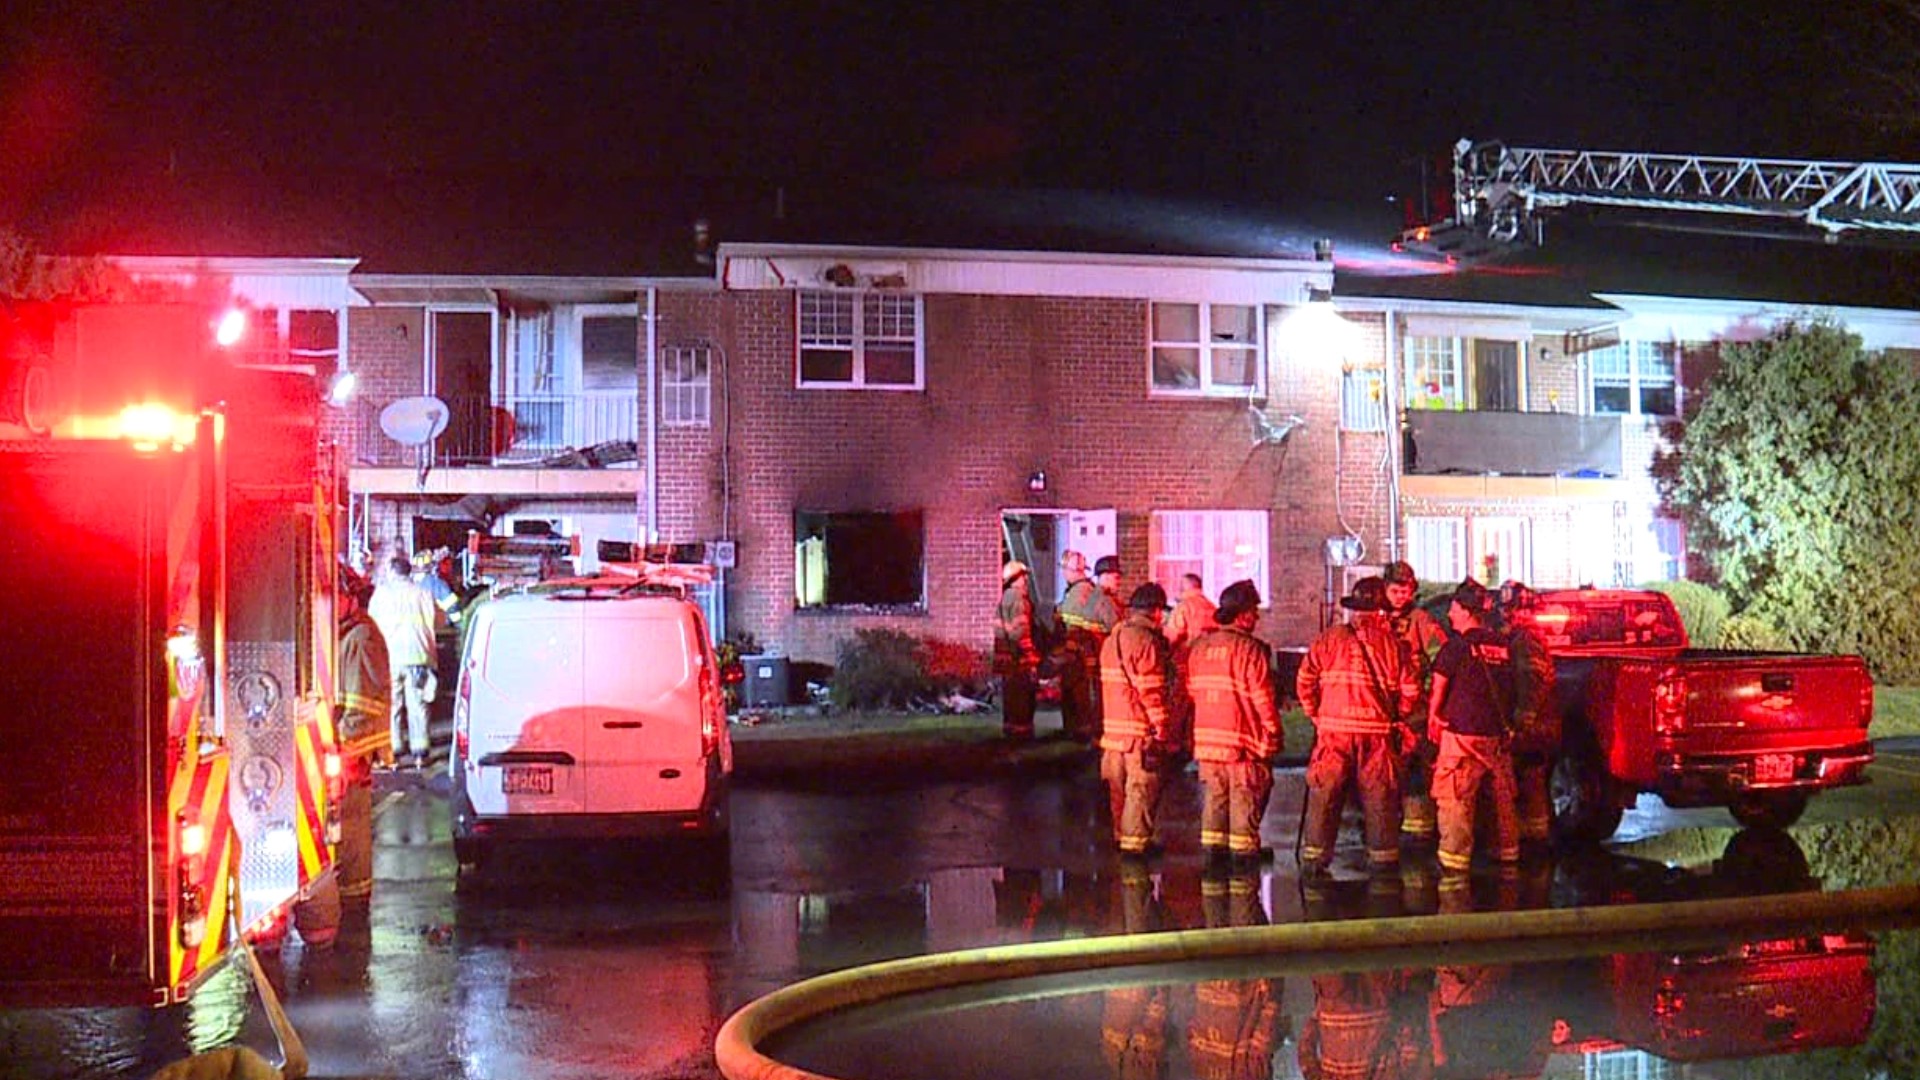 The Kingston fire chief confirms that one man died after an overnight fire in the borough.